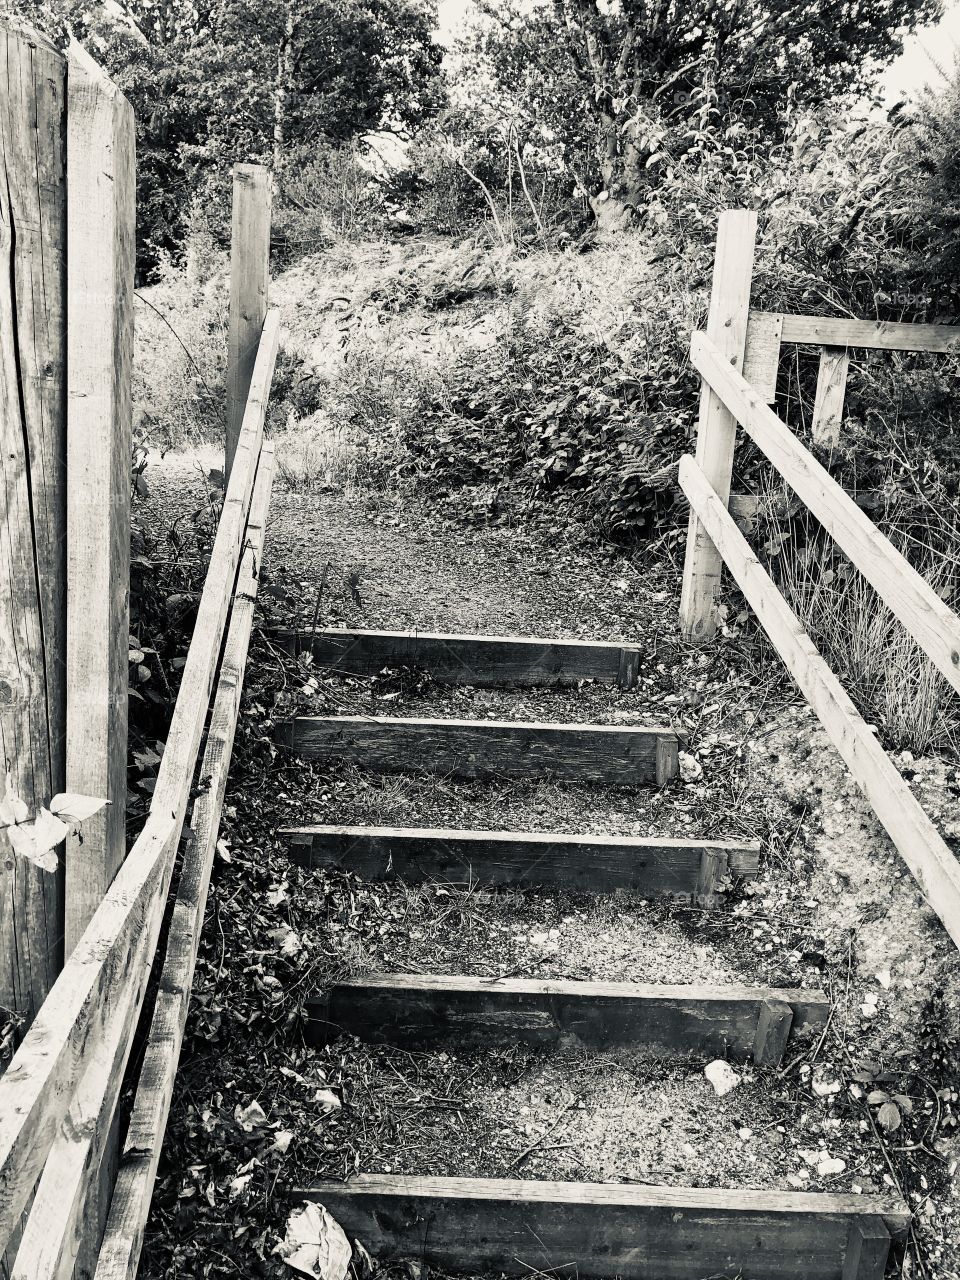 A black and white version of this country setting of these steps.